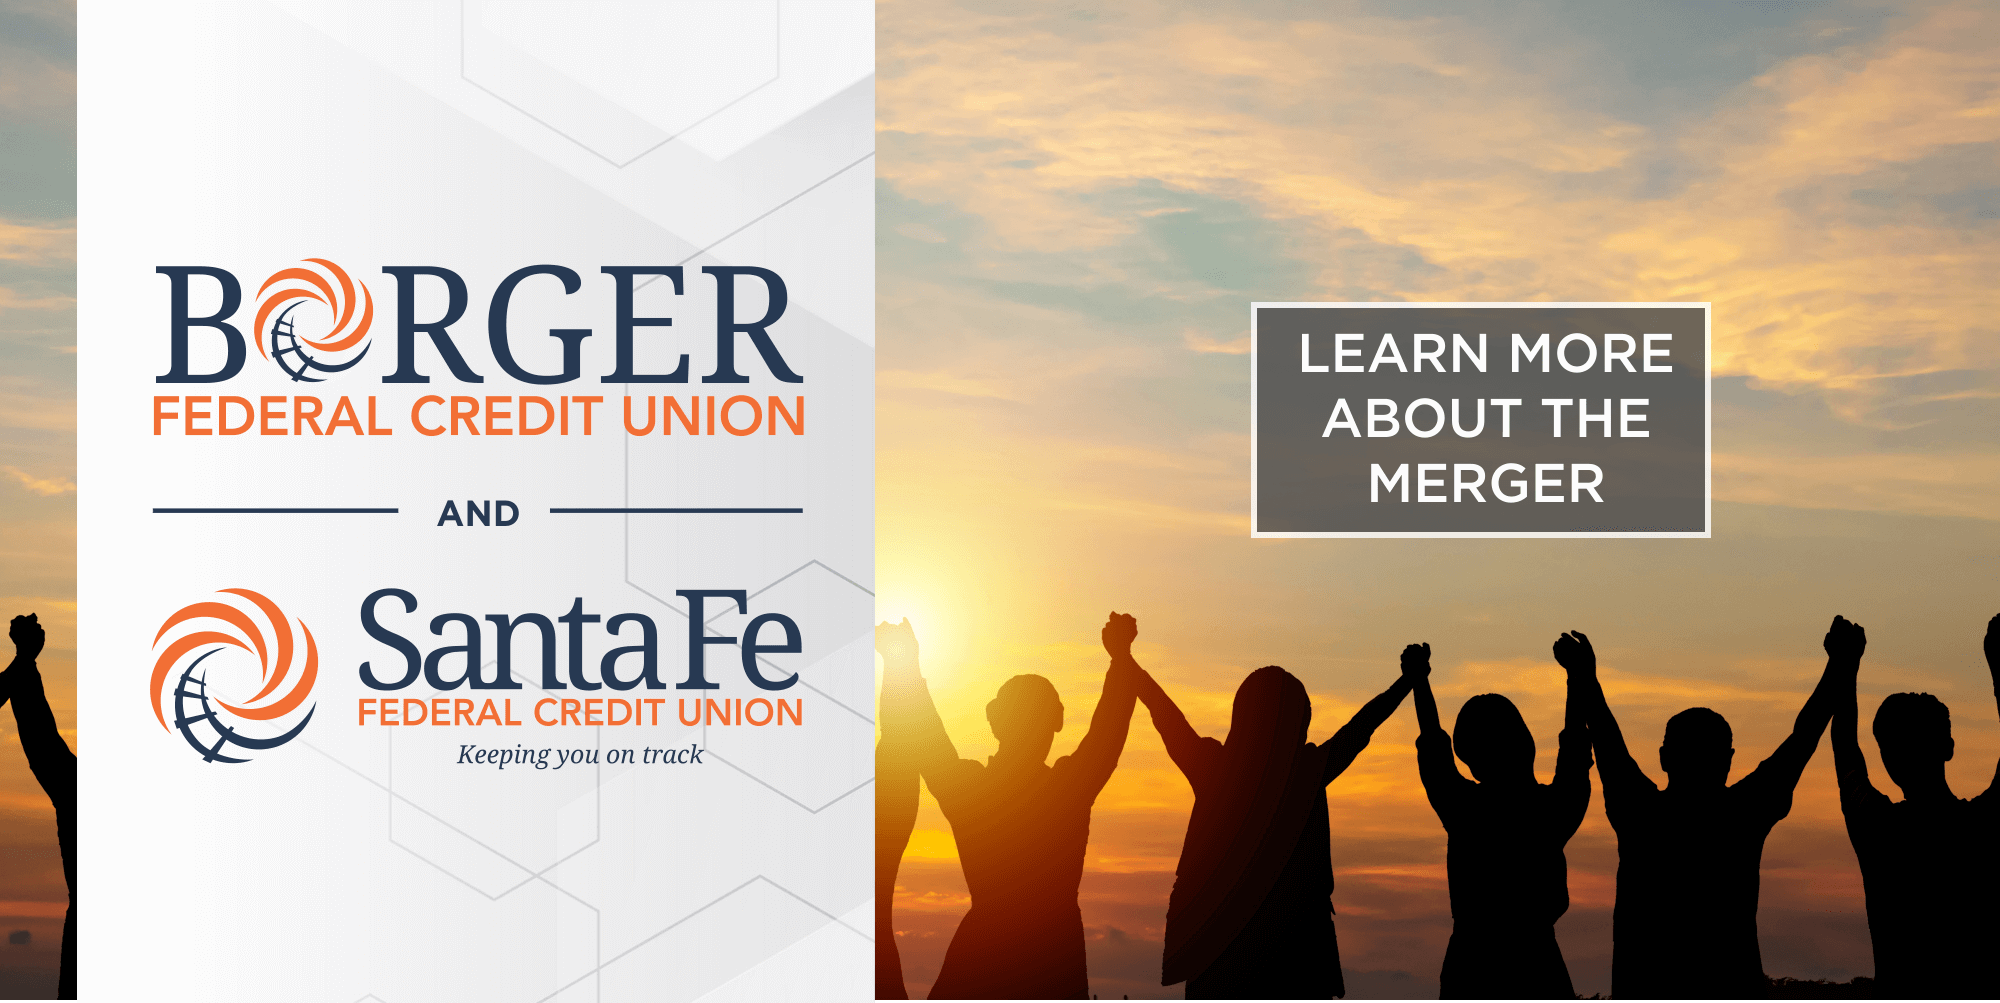 Learn more about the merger